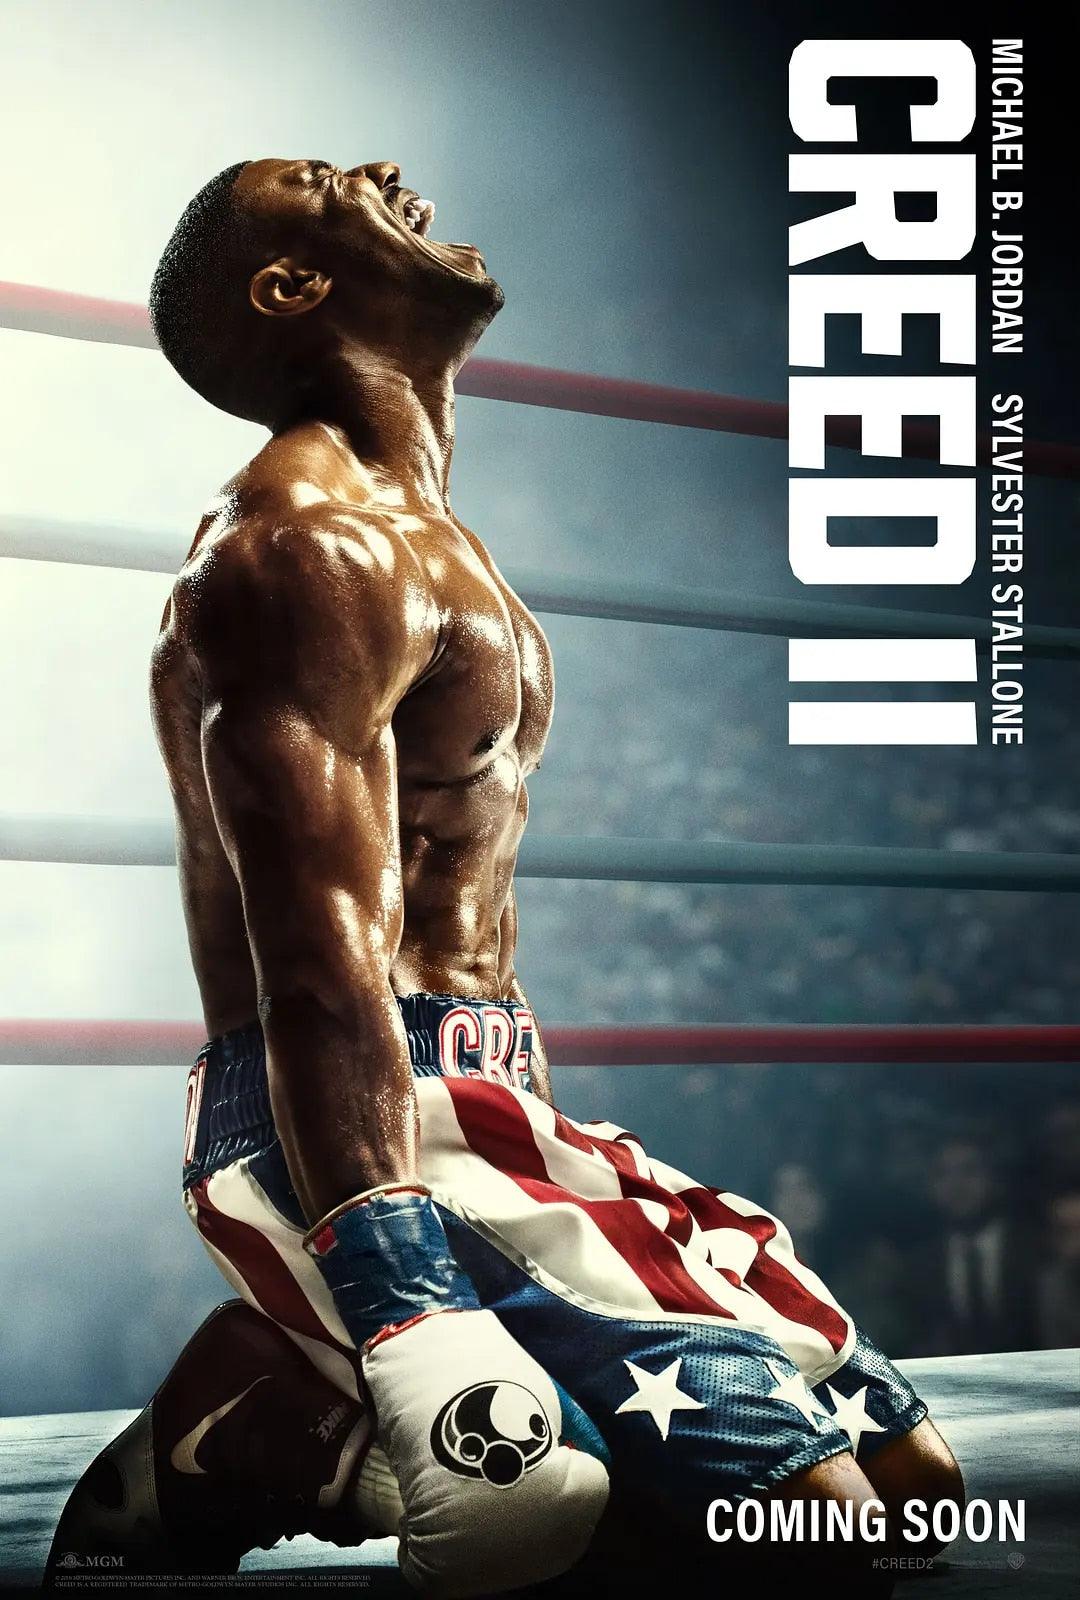 Creed II Adonis Creed Boxing Movie Poster - Aesthetic Wall Decor